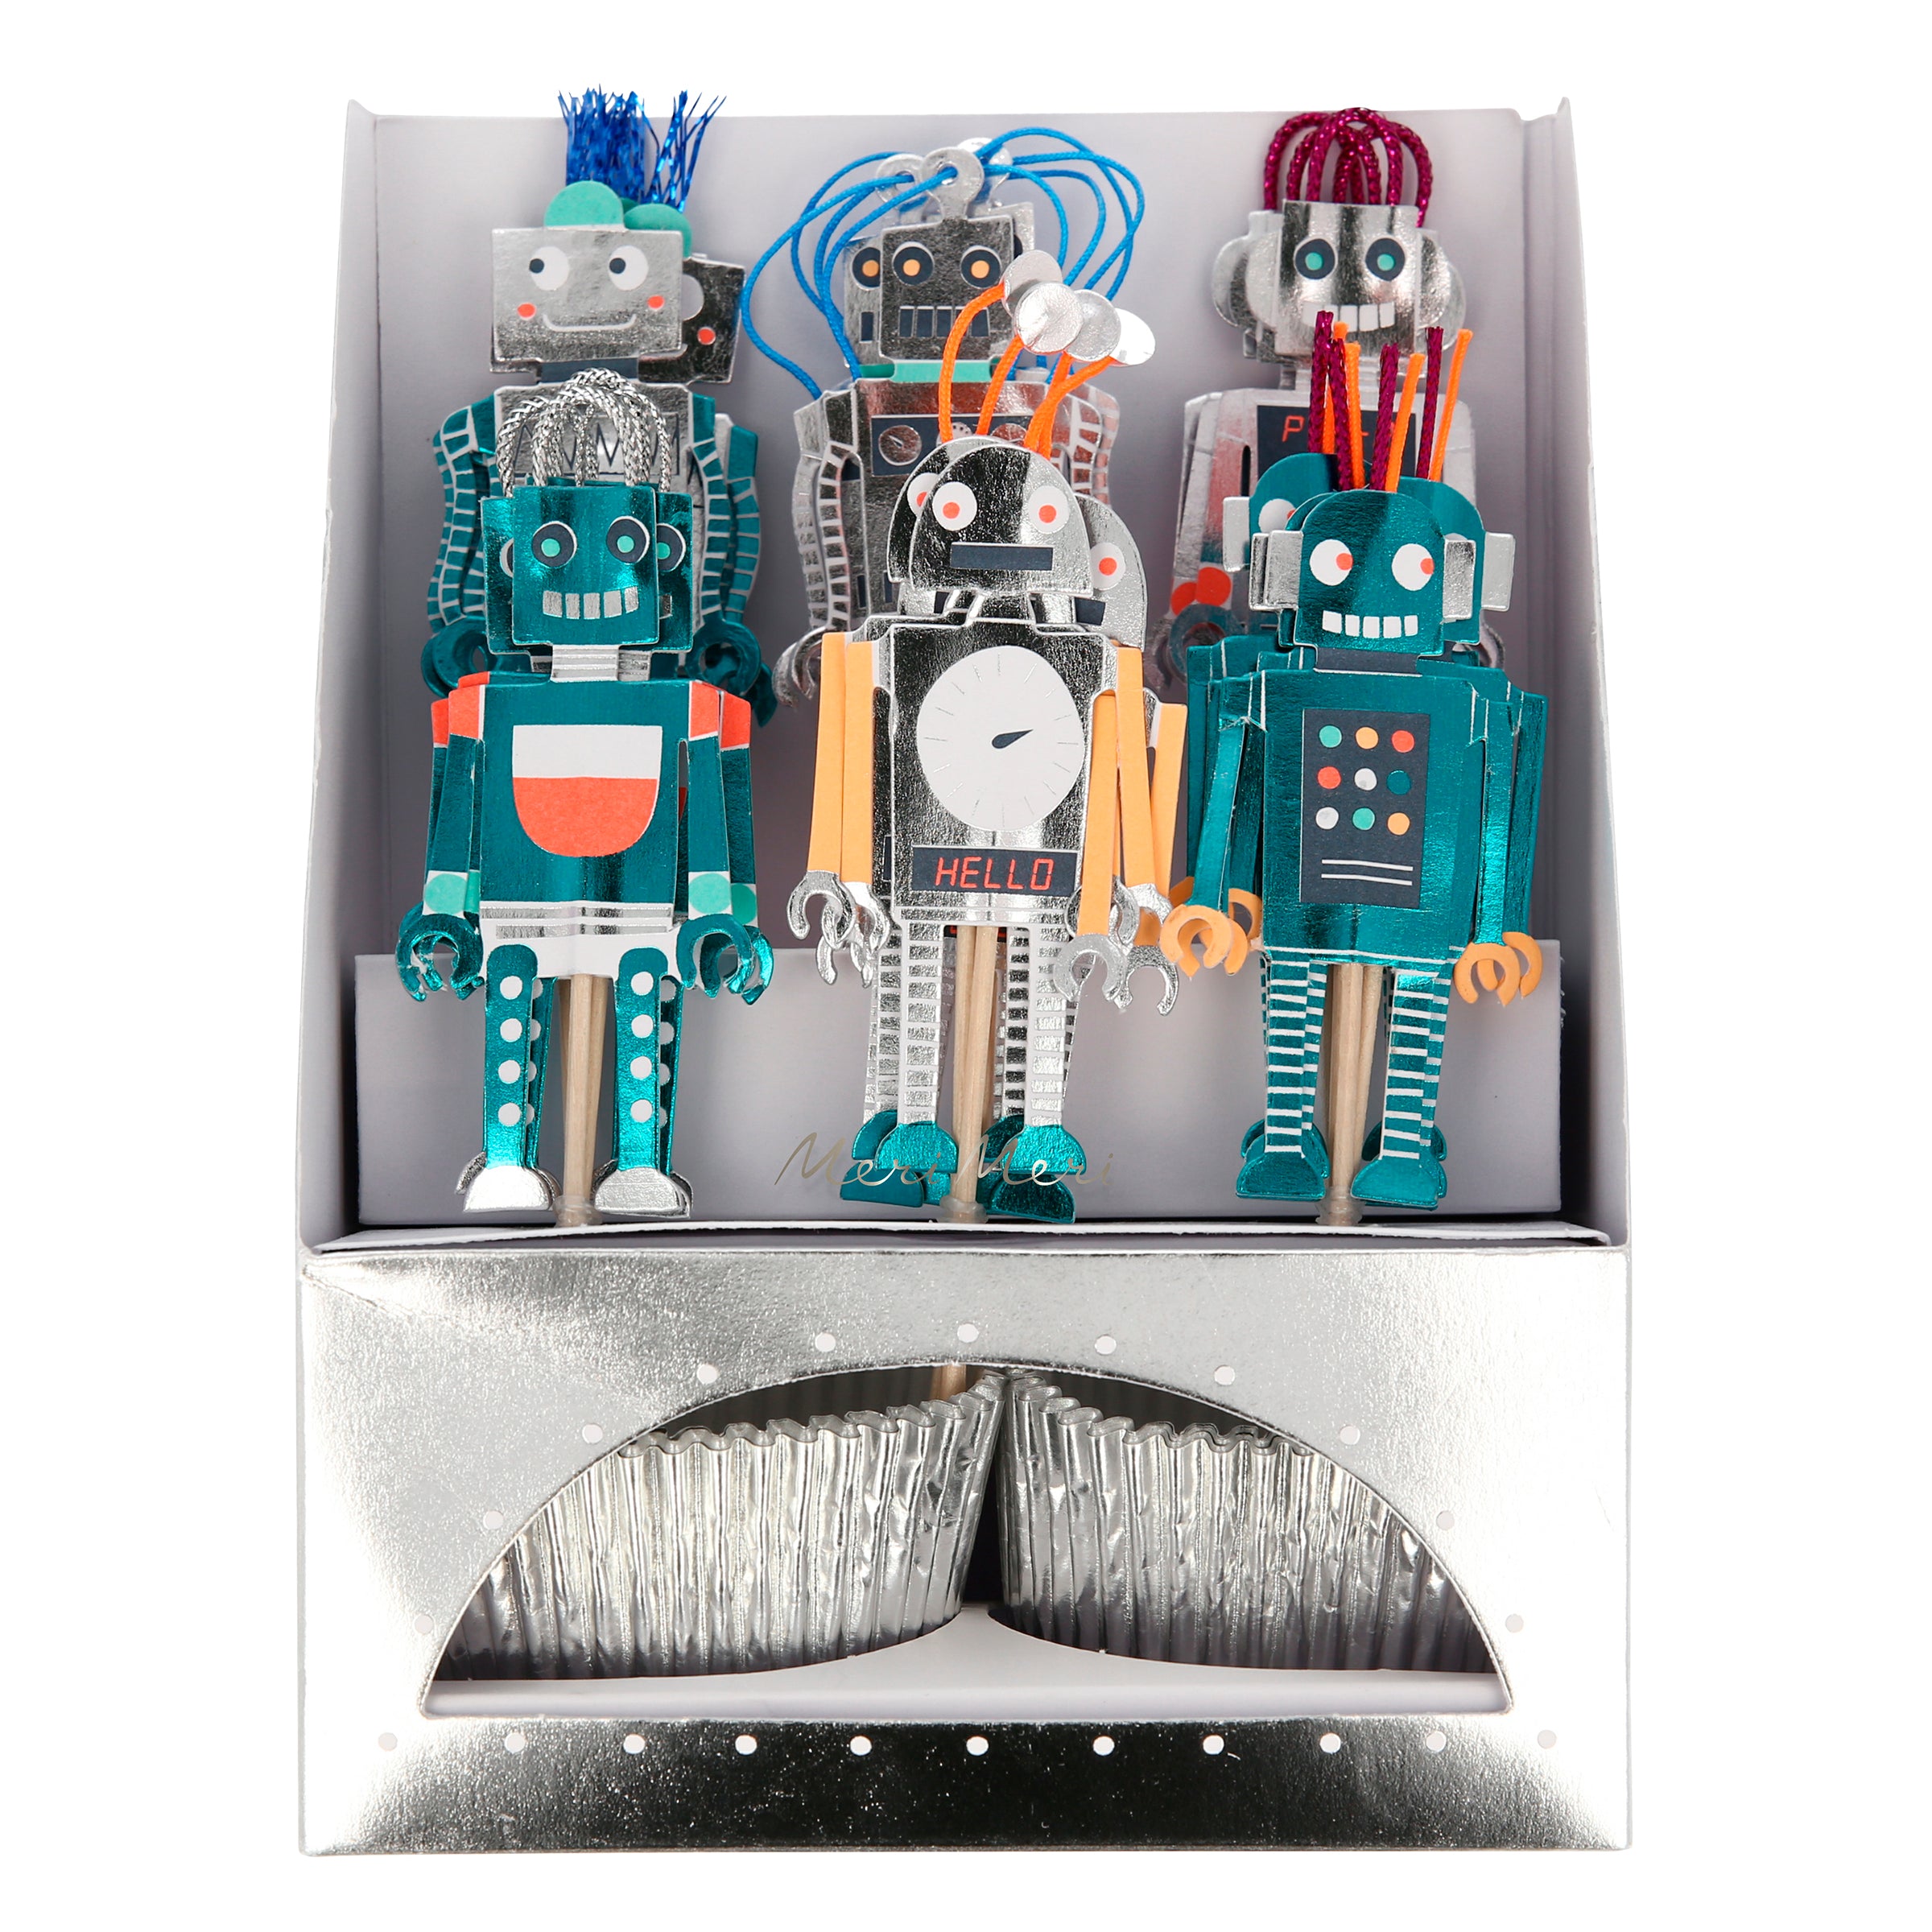 Our special kit includes silver foil cupcake cases and shiny foil cake toppers, perfect for a robot birthday party or space birthday party.